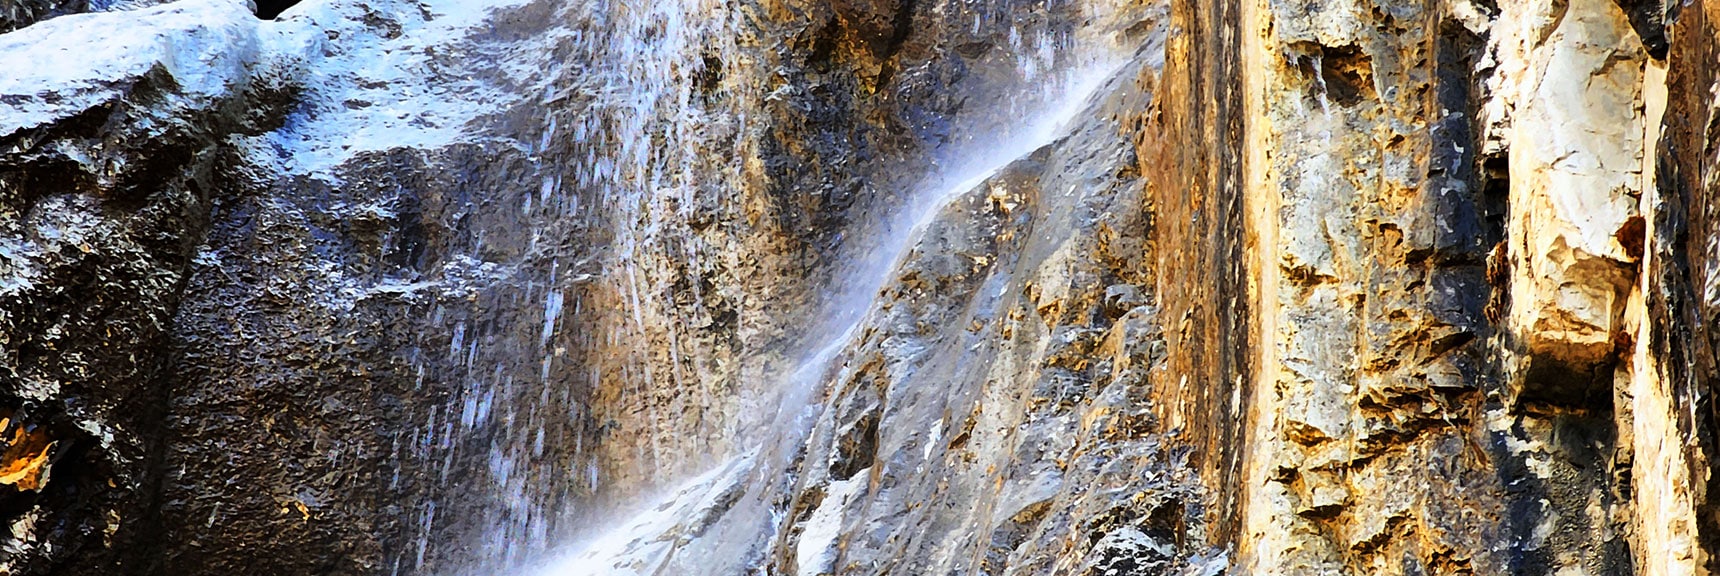 Each Cascading Stream a Totally Unique Design | Mary Jane Falls | Mt. Charleston Wilderness | Spring Mountains, Nevada